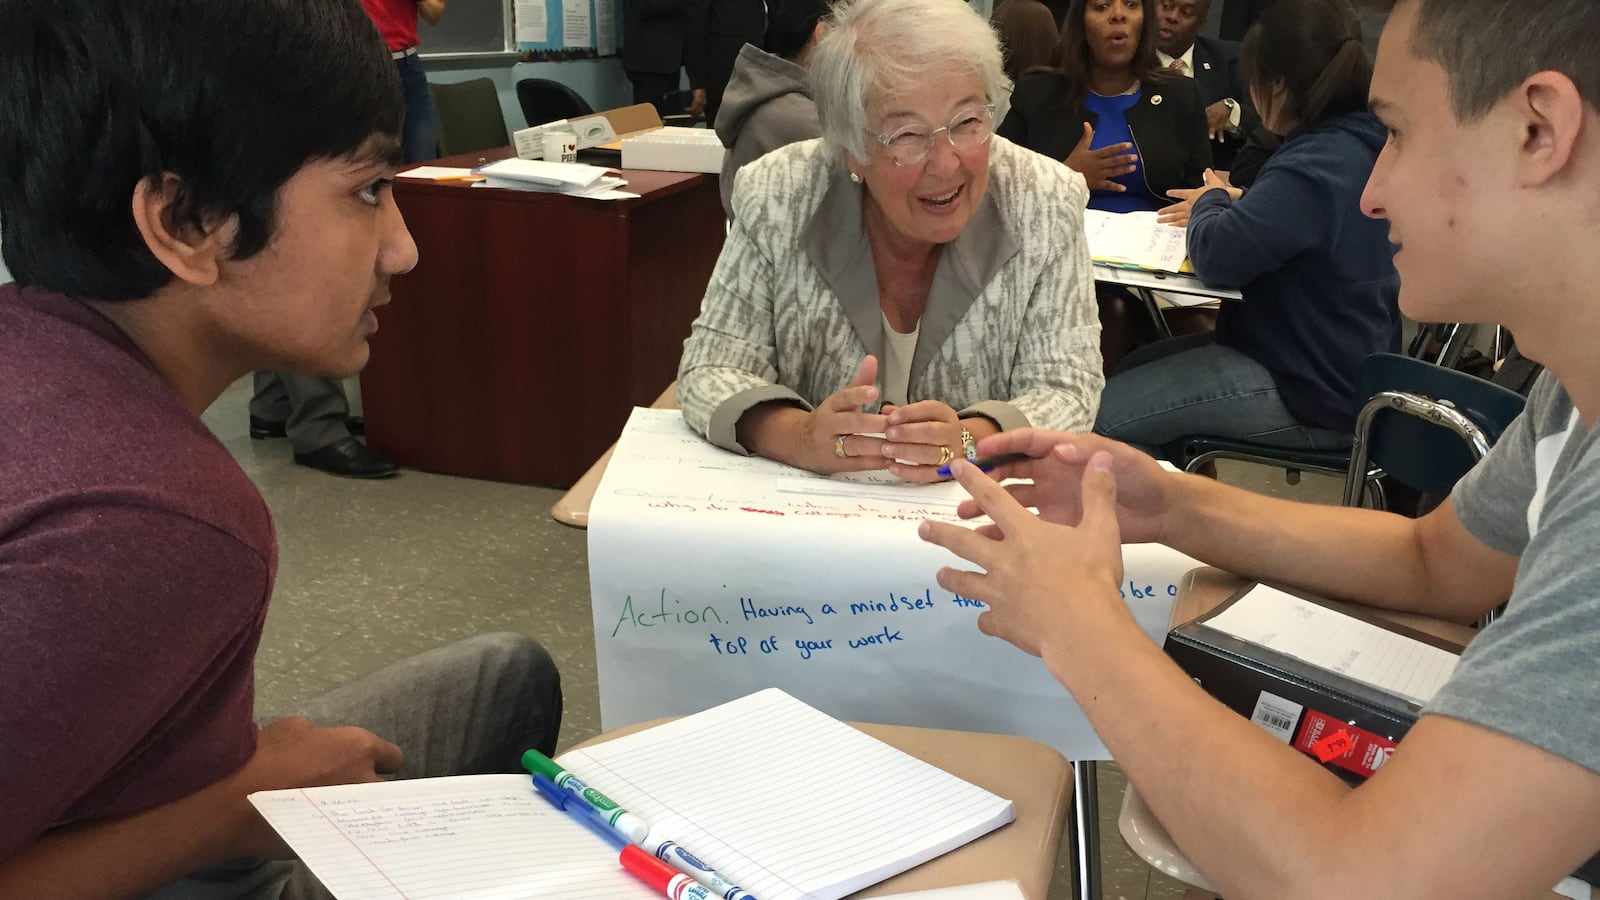 New York City schools Chancellor Carmen Fariña talks with students about their college plans.